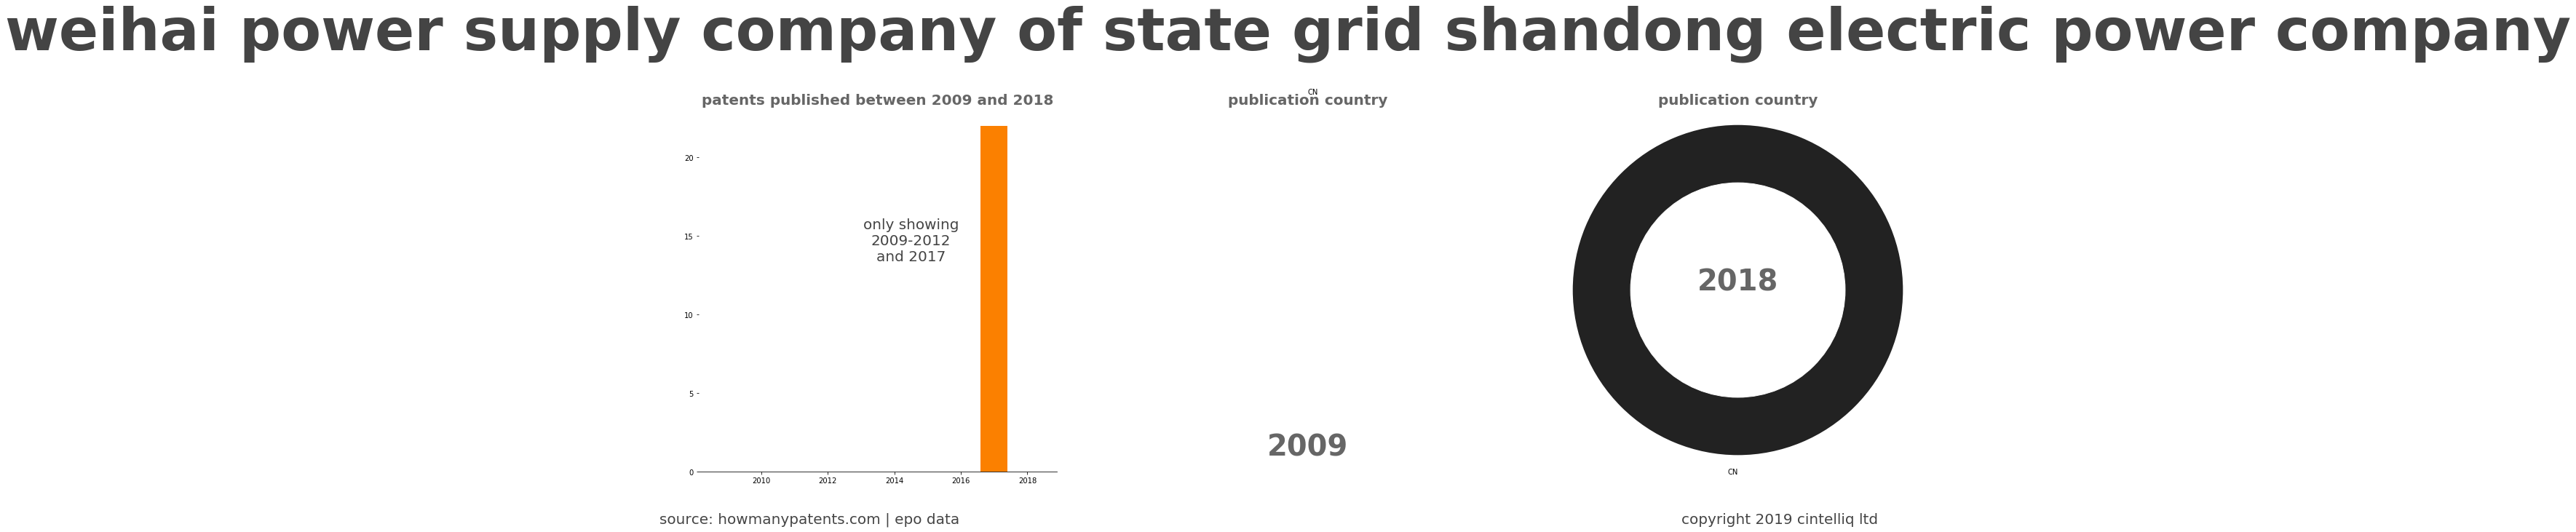 summary of patents for Weihai Power Supply Company Of State Grid Shandong Electric Power Company